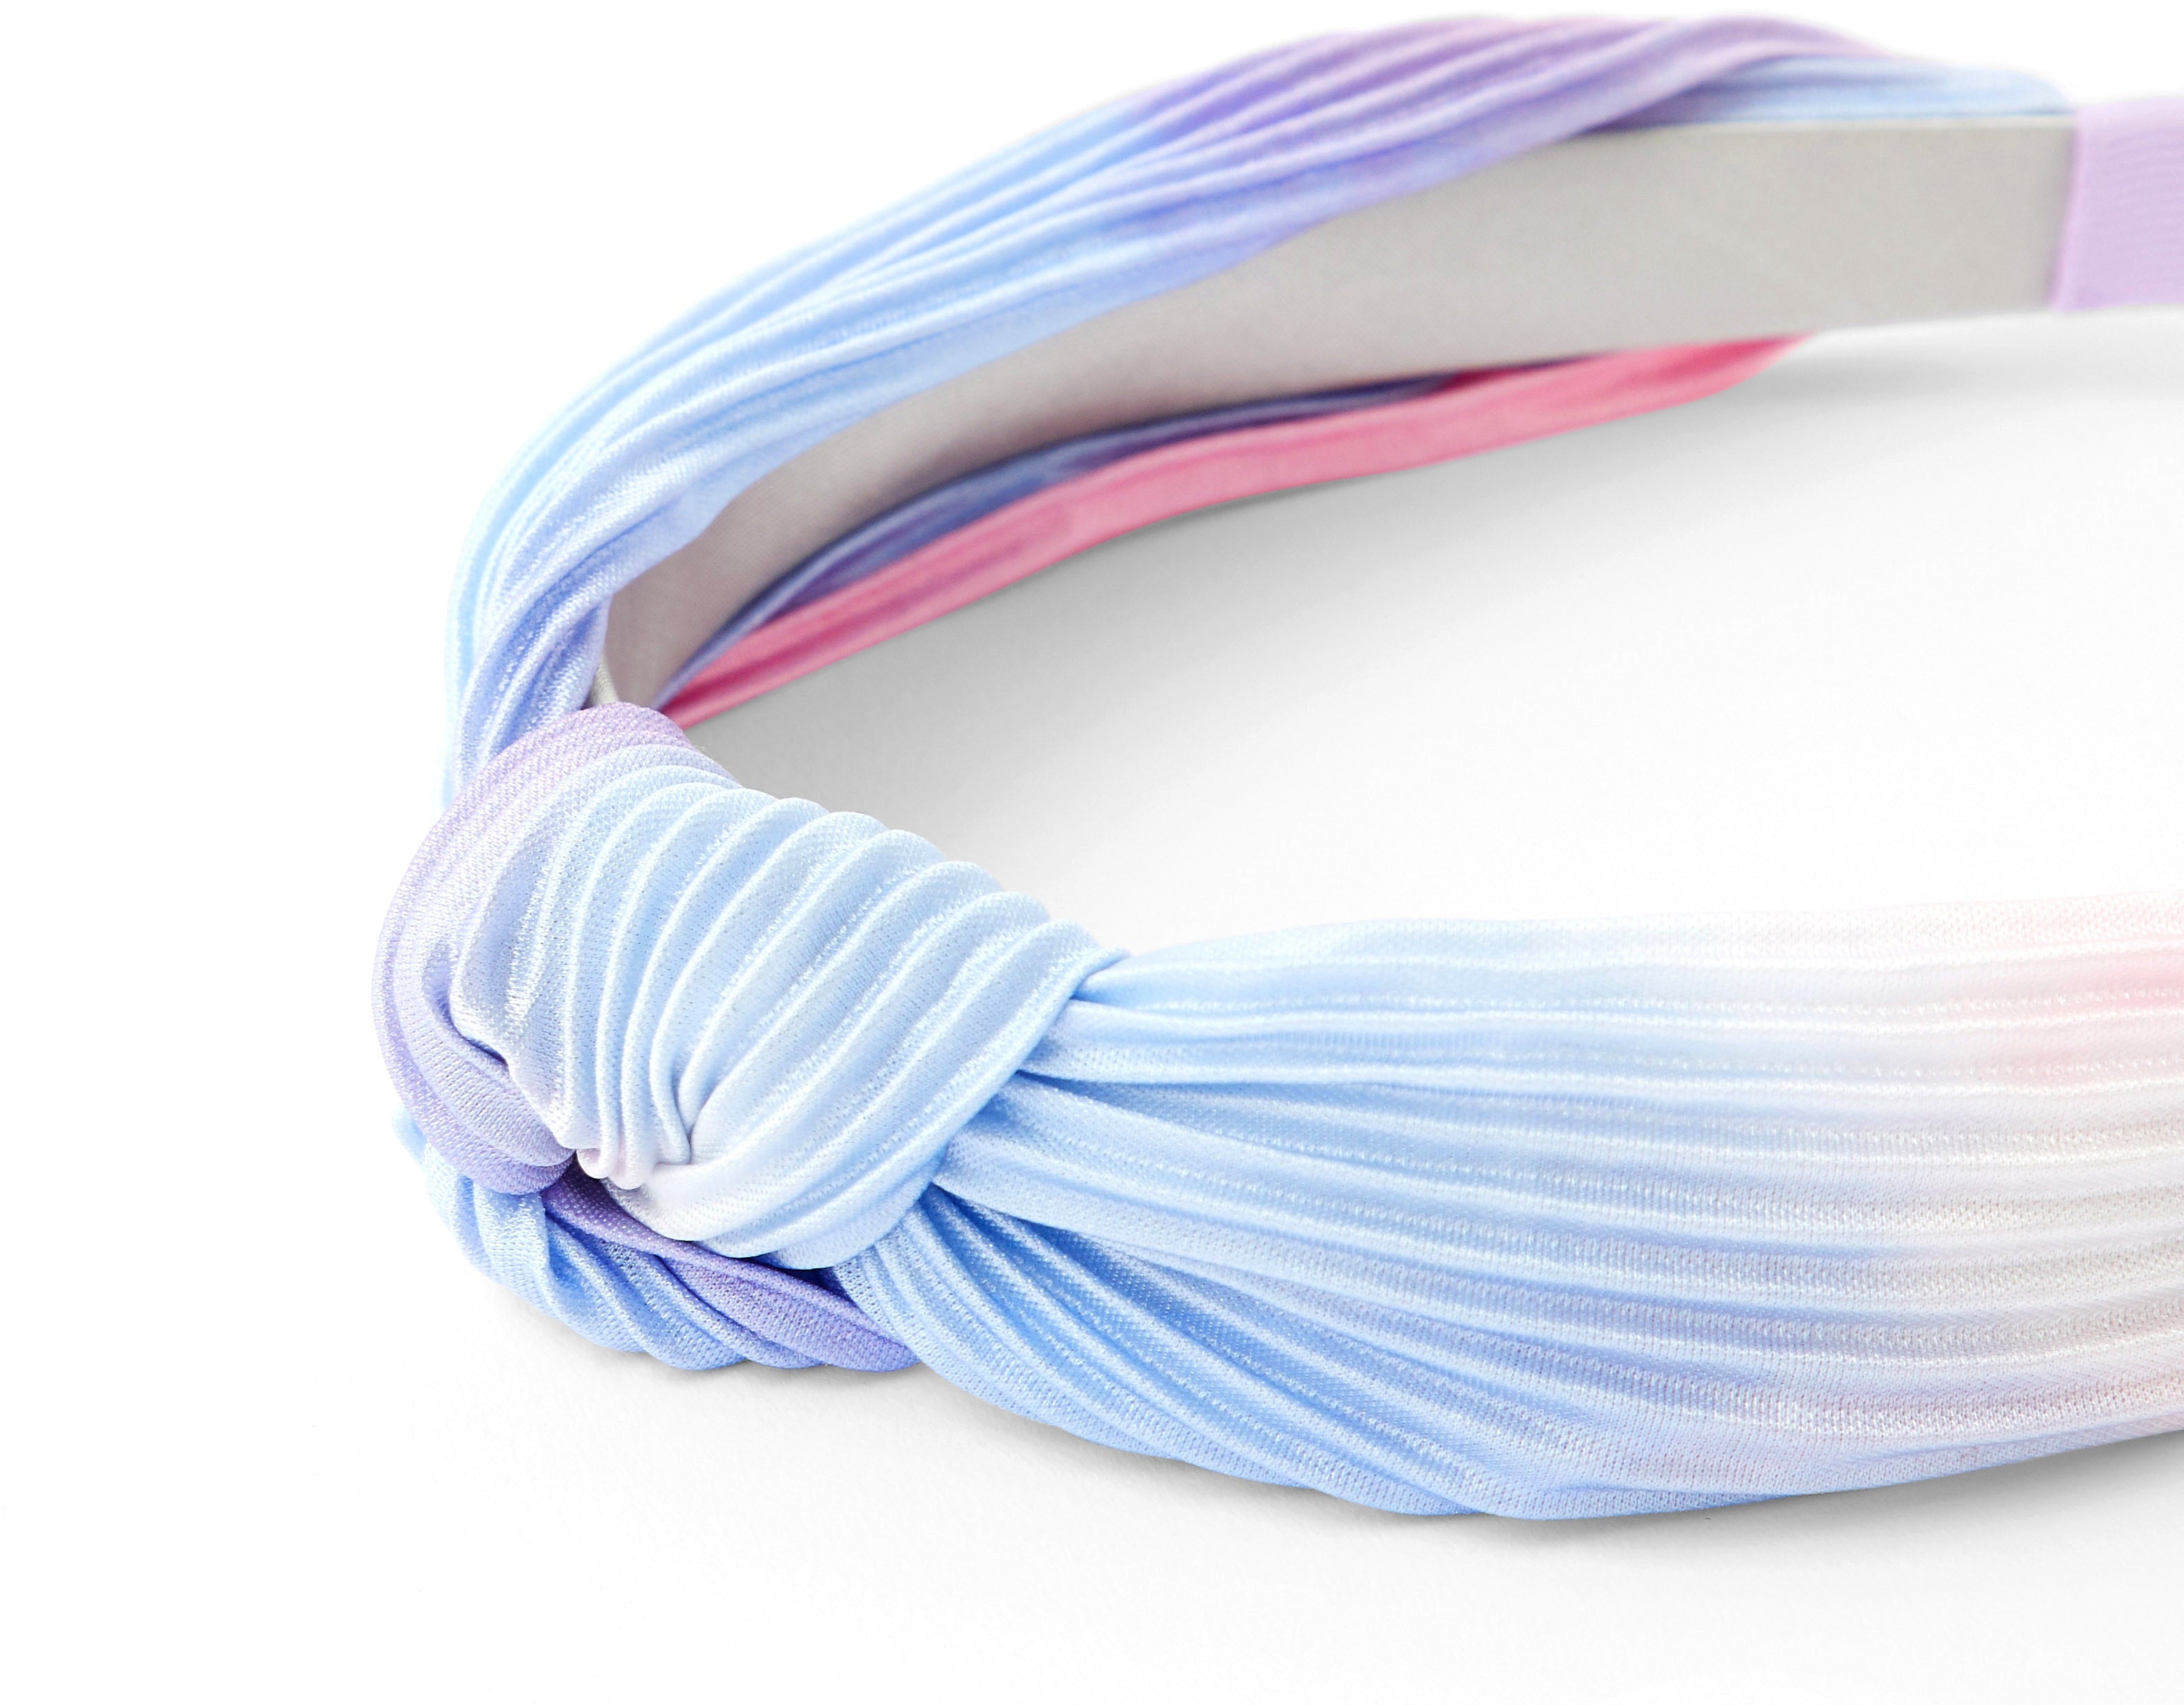 Accessorize London Ombre Knotted Alice Band